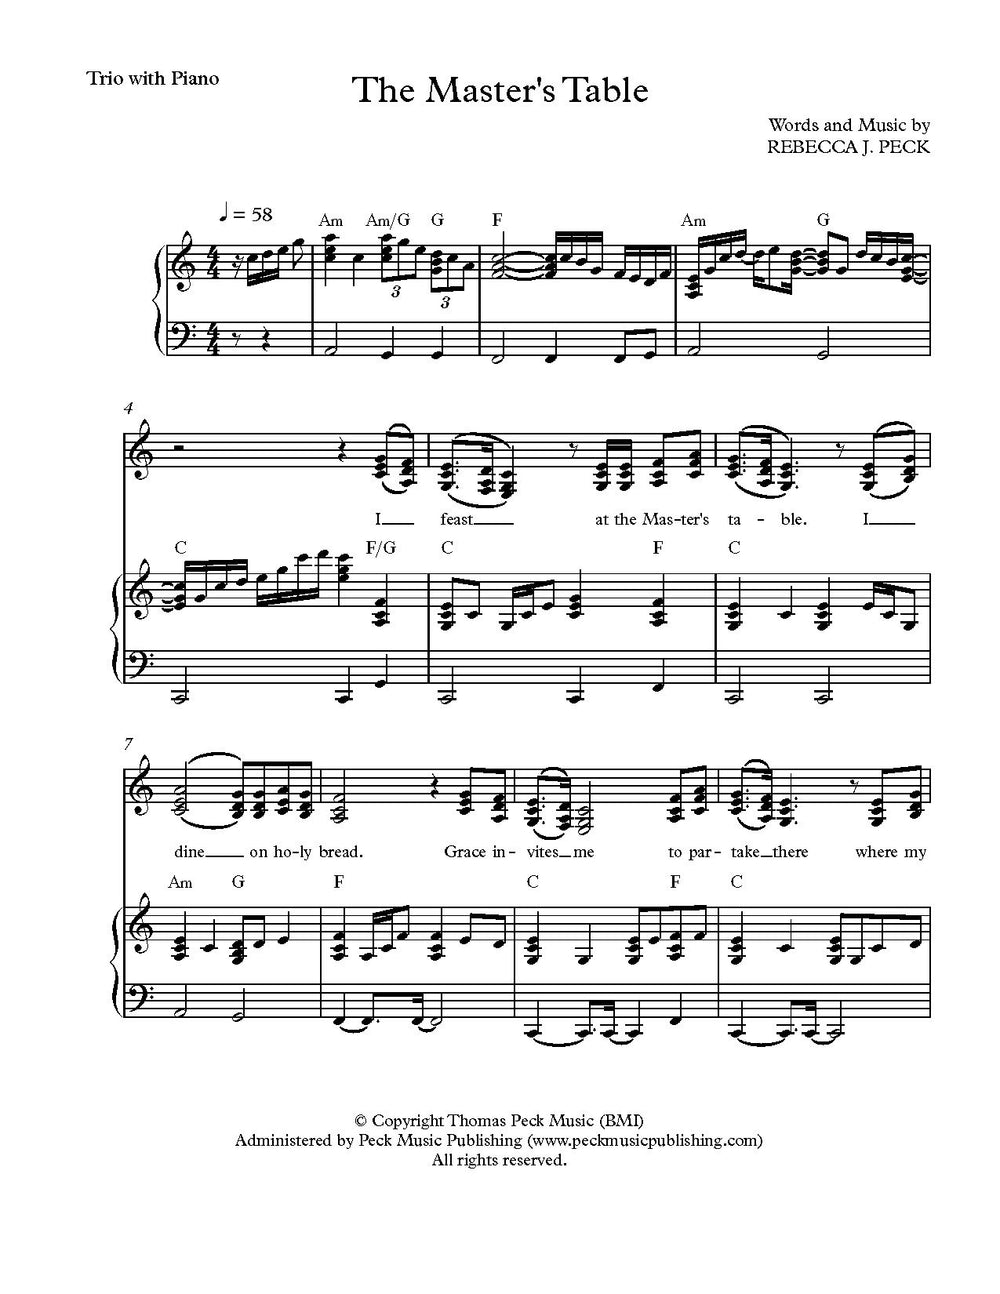 The Master's Table - sheet music